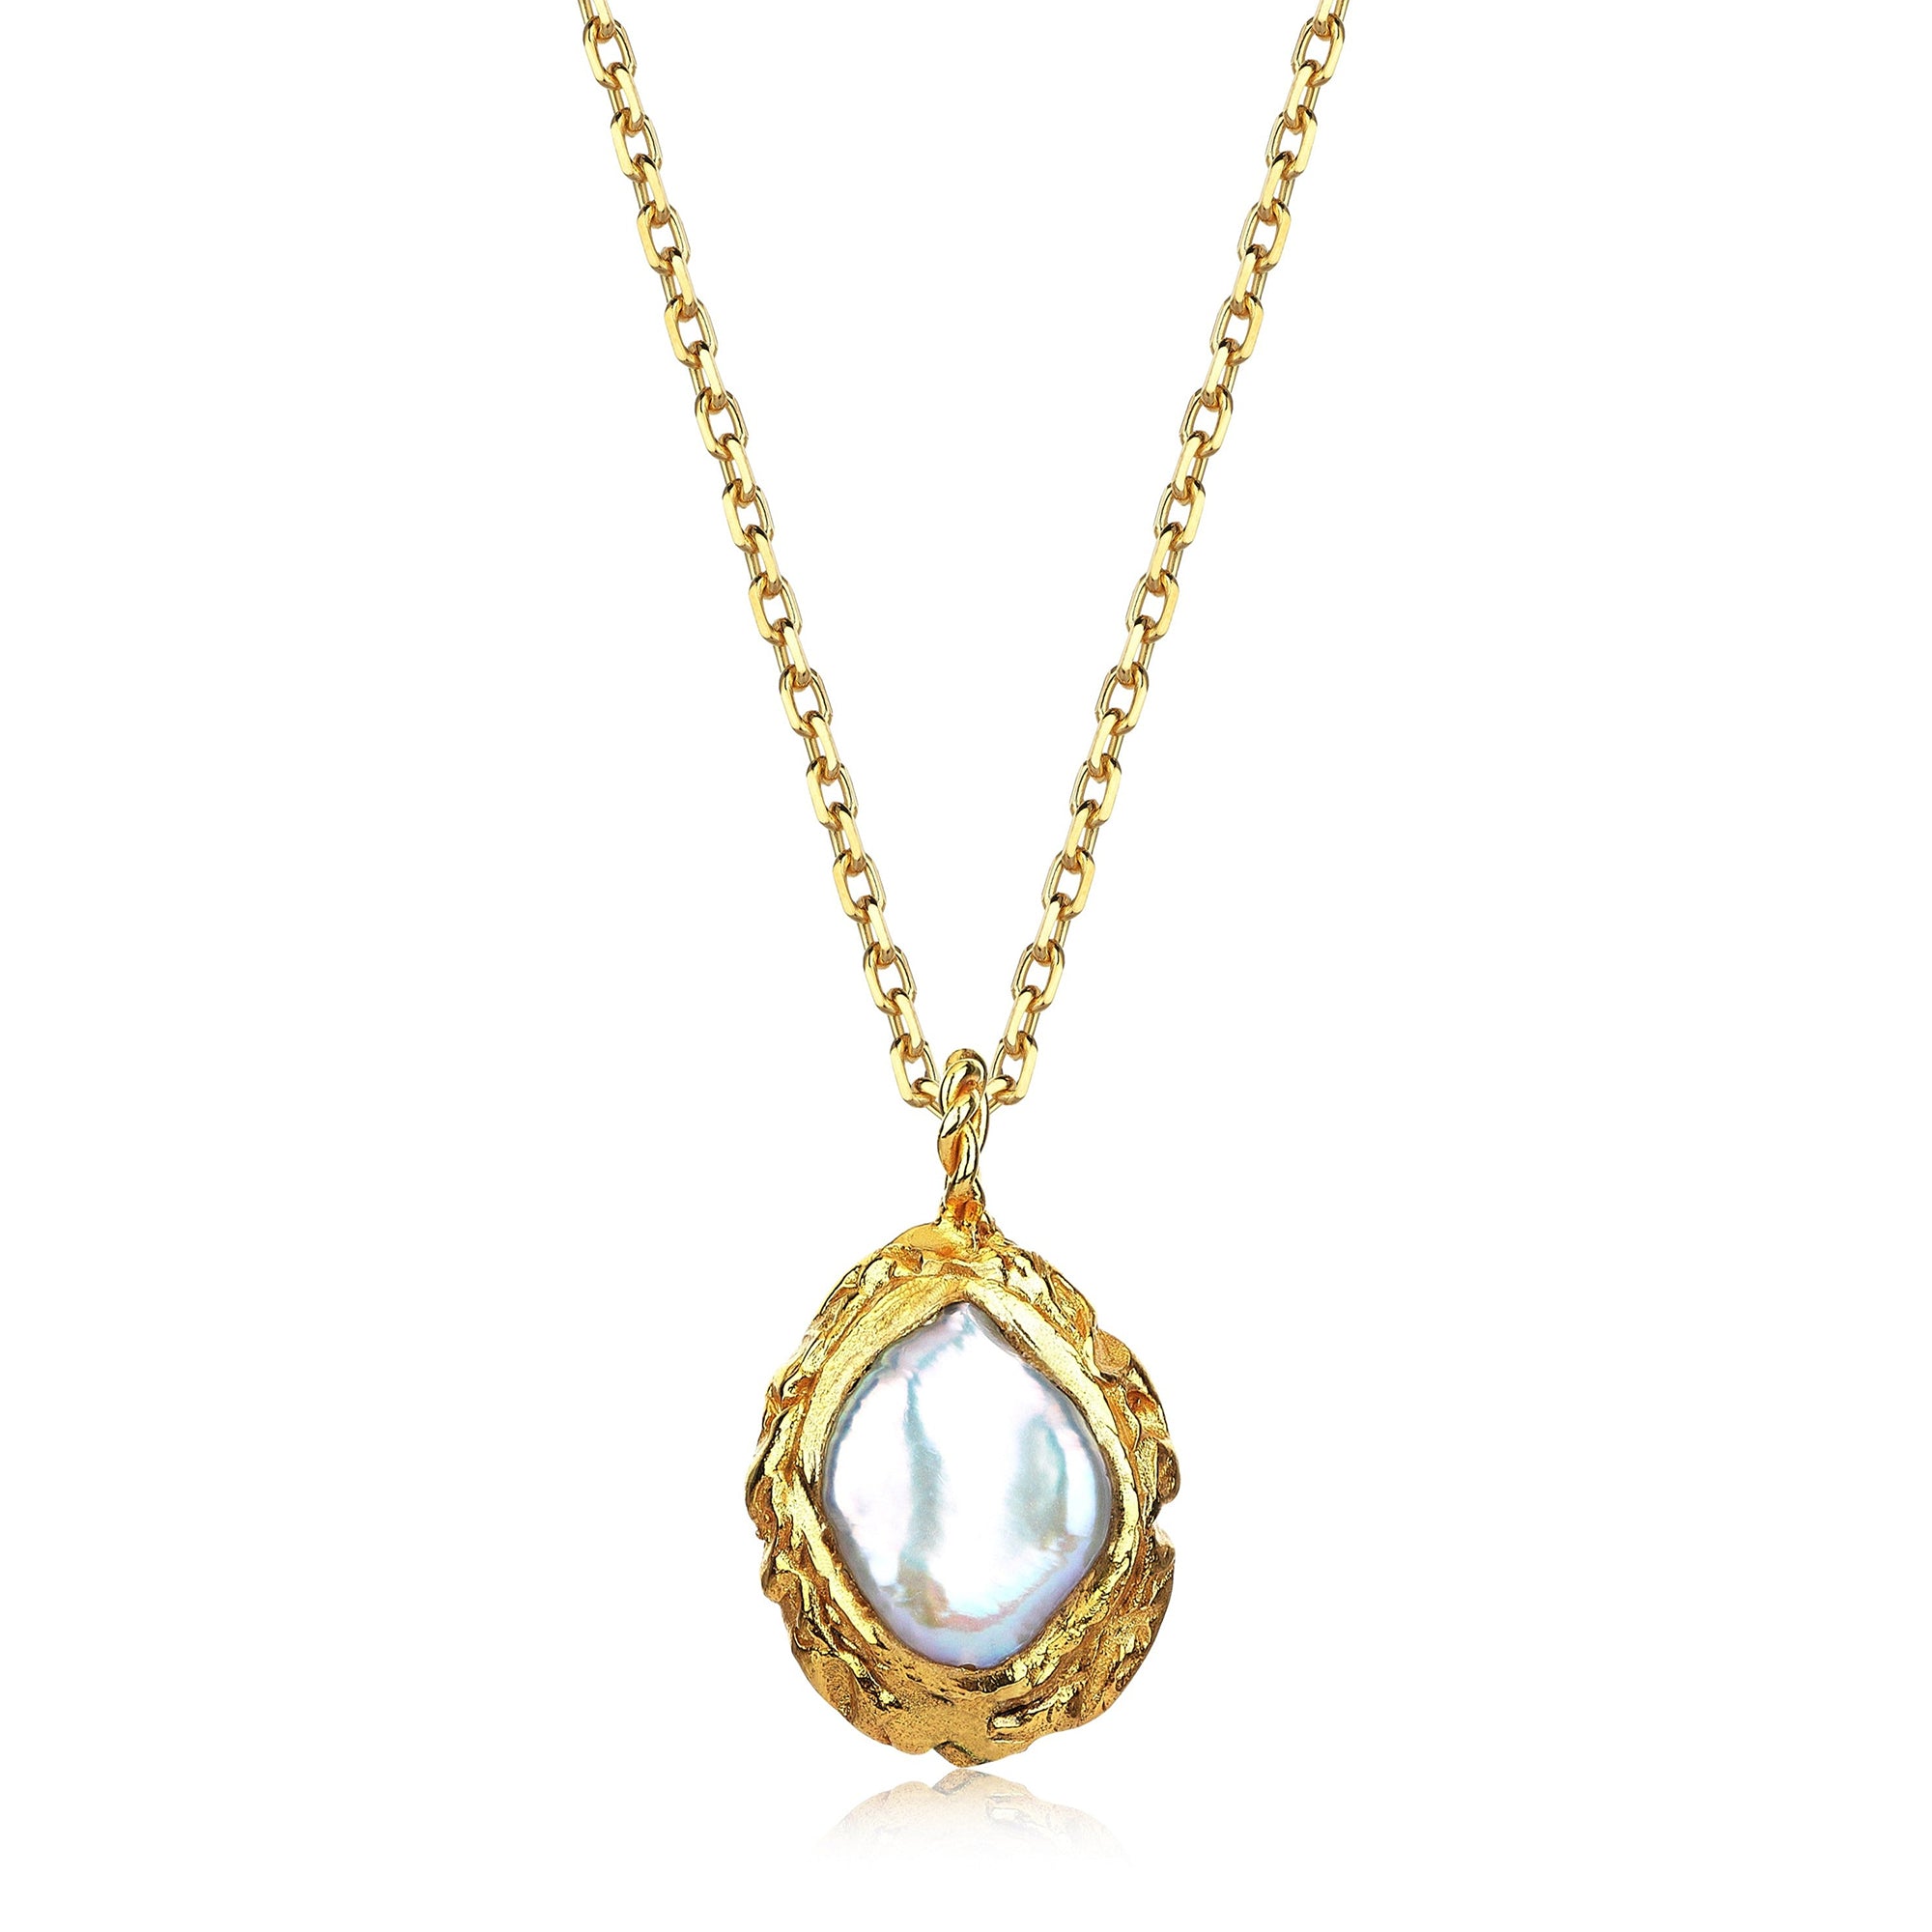 THE PEARL DROP NECKLACE